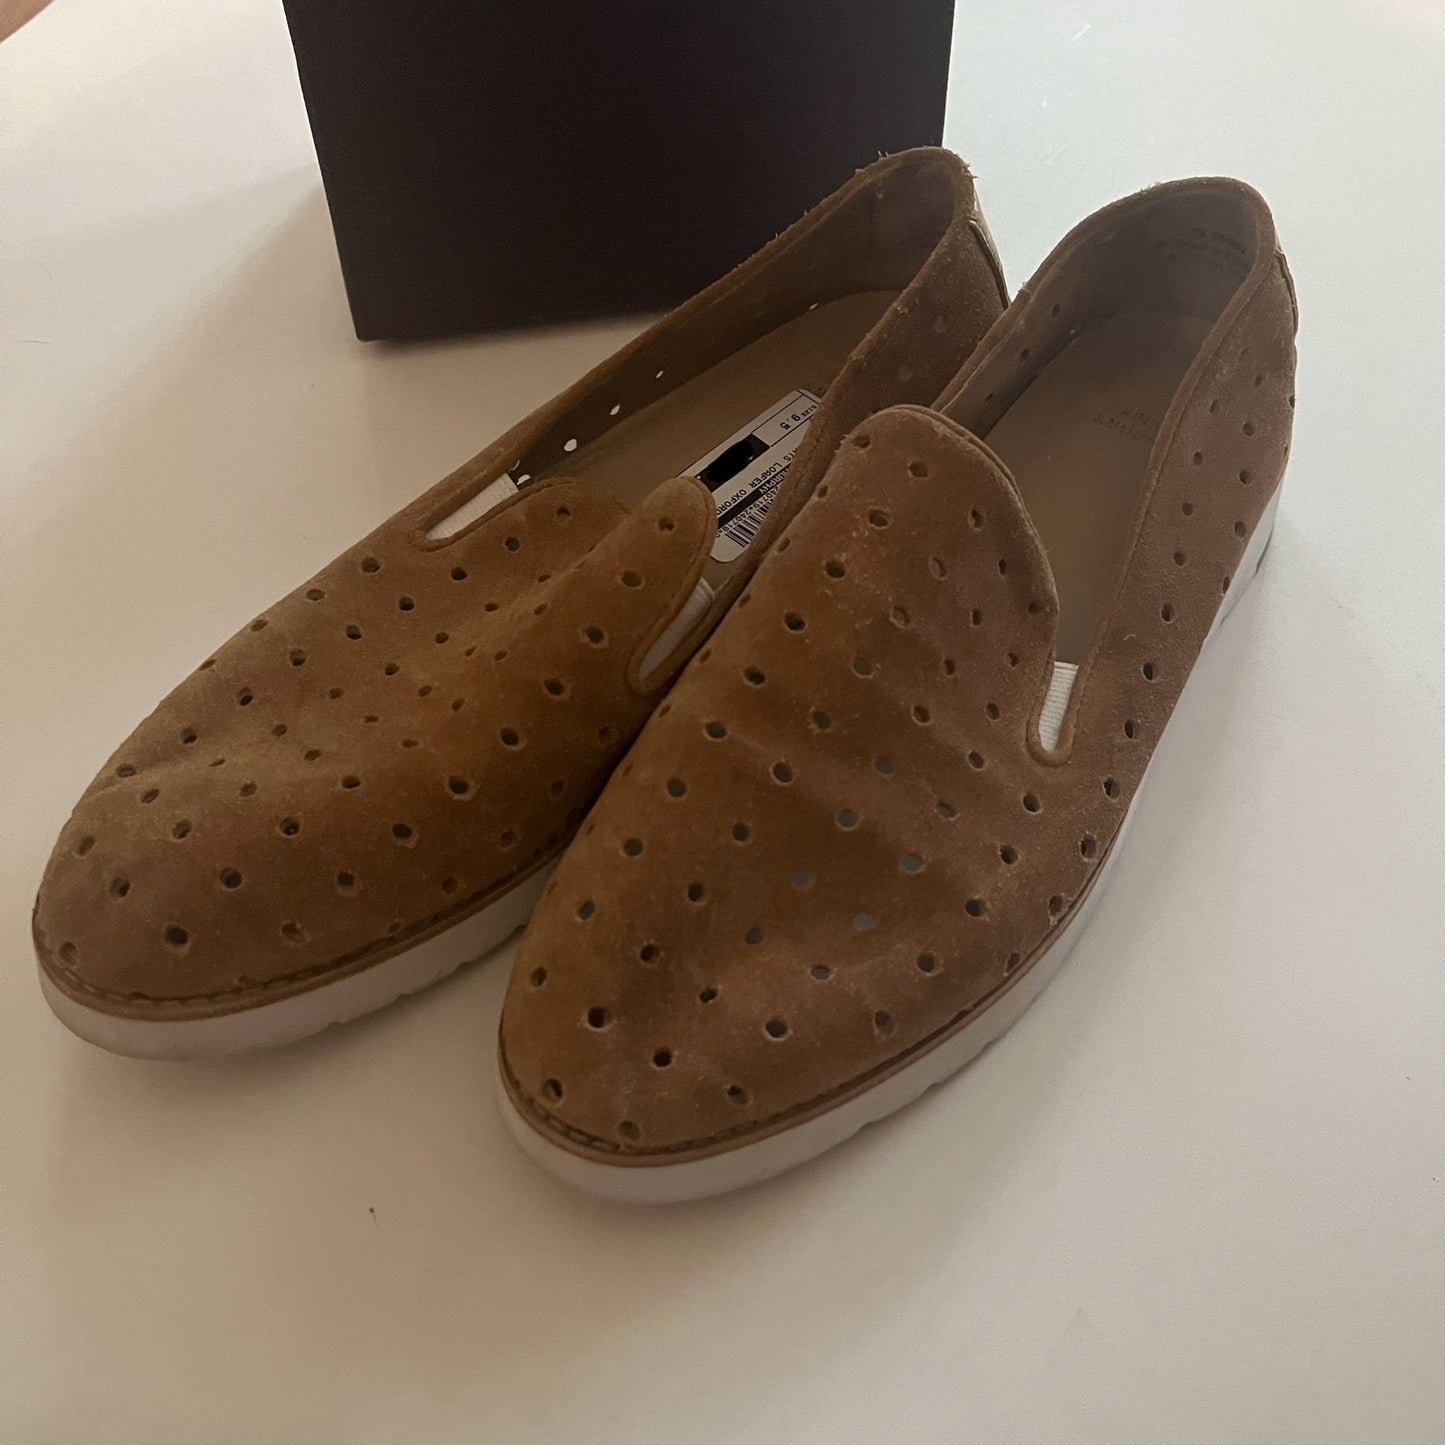 Brown Shoes Flats Loafer Oxford Johnston & Murphy, Size 9.5